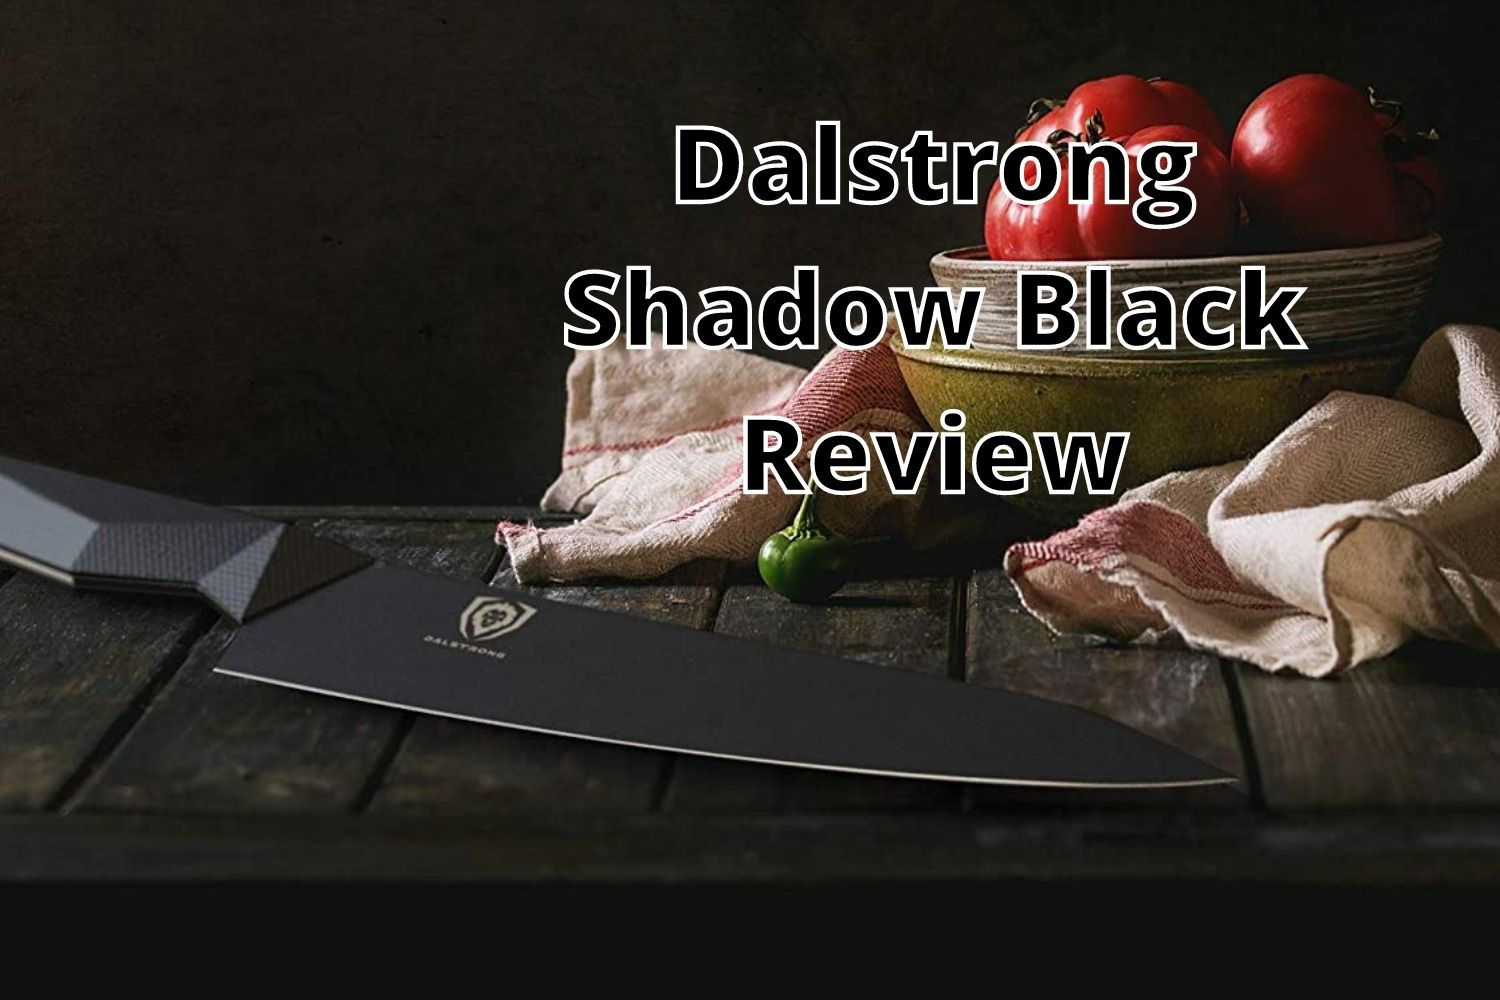 Dalstrong Shadow Black Review